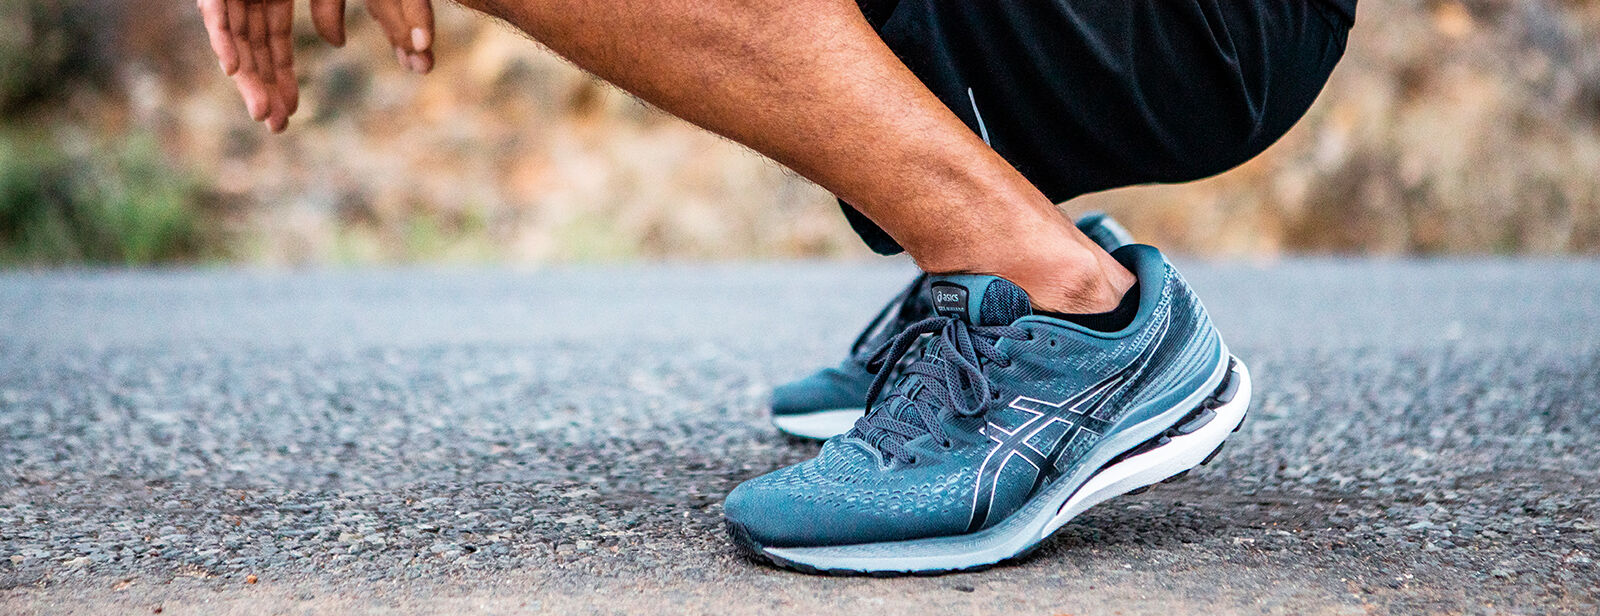 Which Asics Shoes Have The Best Arch Support?